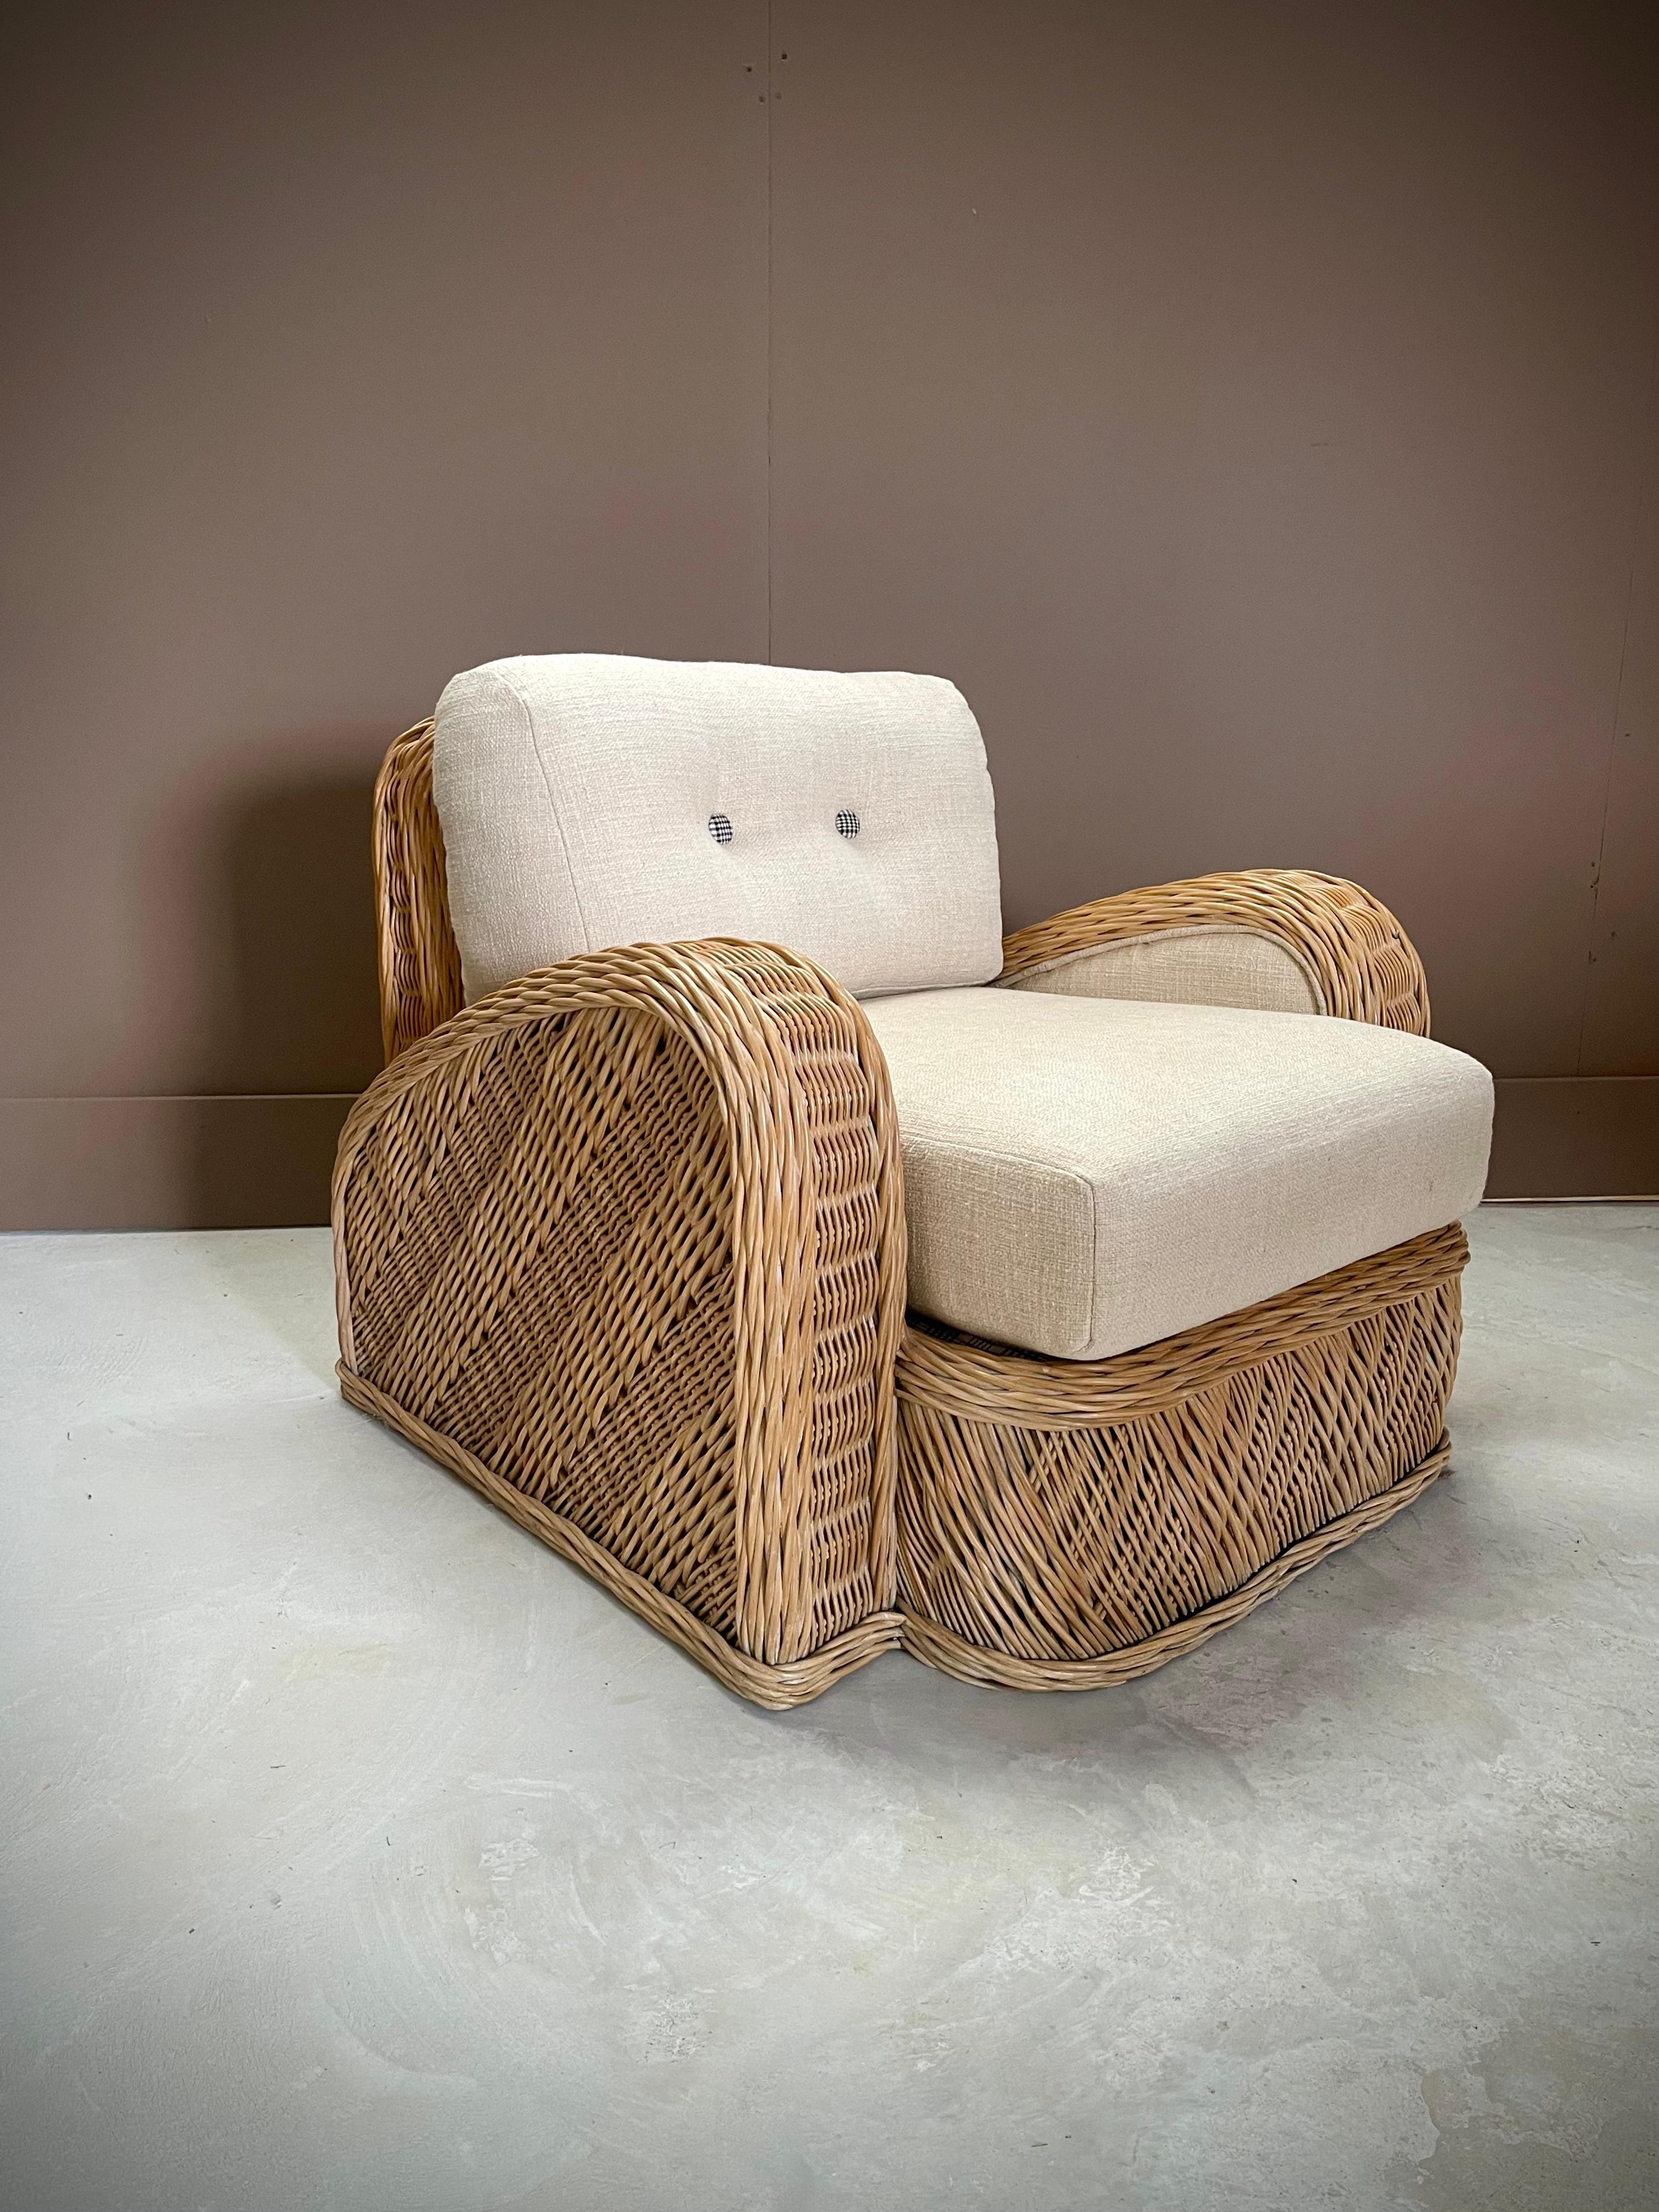 Introducing the epitome of sophistication: the Postmodern Jay Spectre Wicker Chair. With its timeless curved arms and avant-garde design, this chair seamlessly blends modern flair with classic elegance. Crafted with performance fabric, it boasts